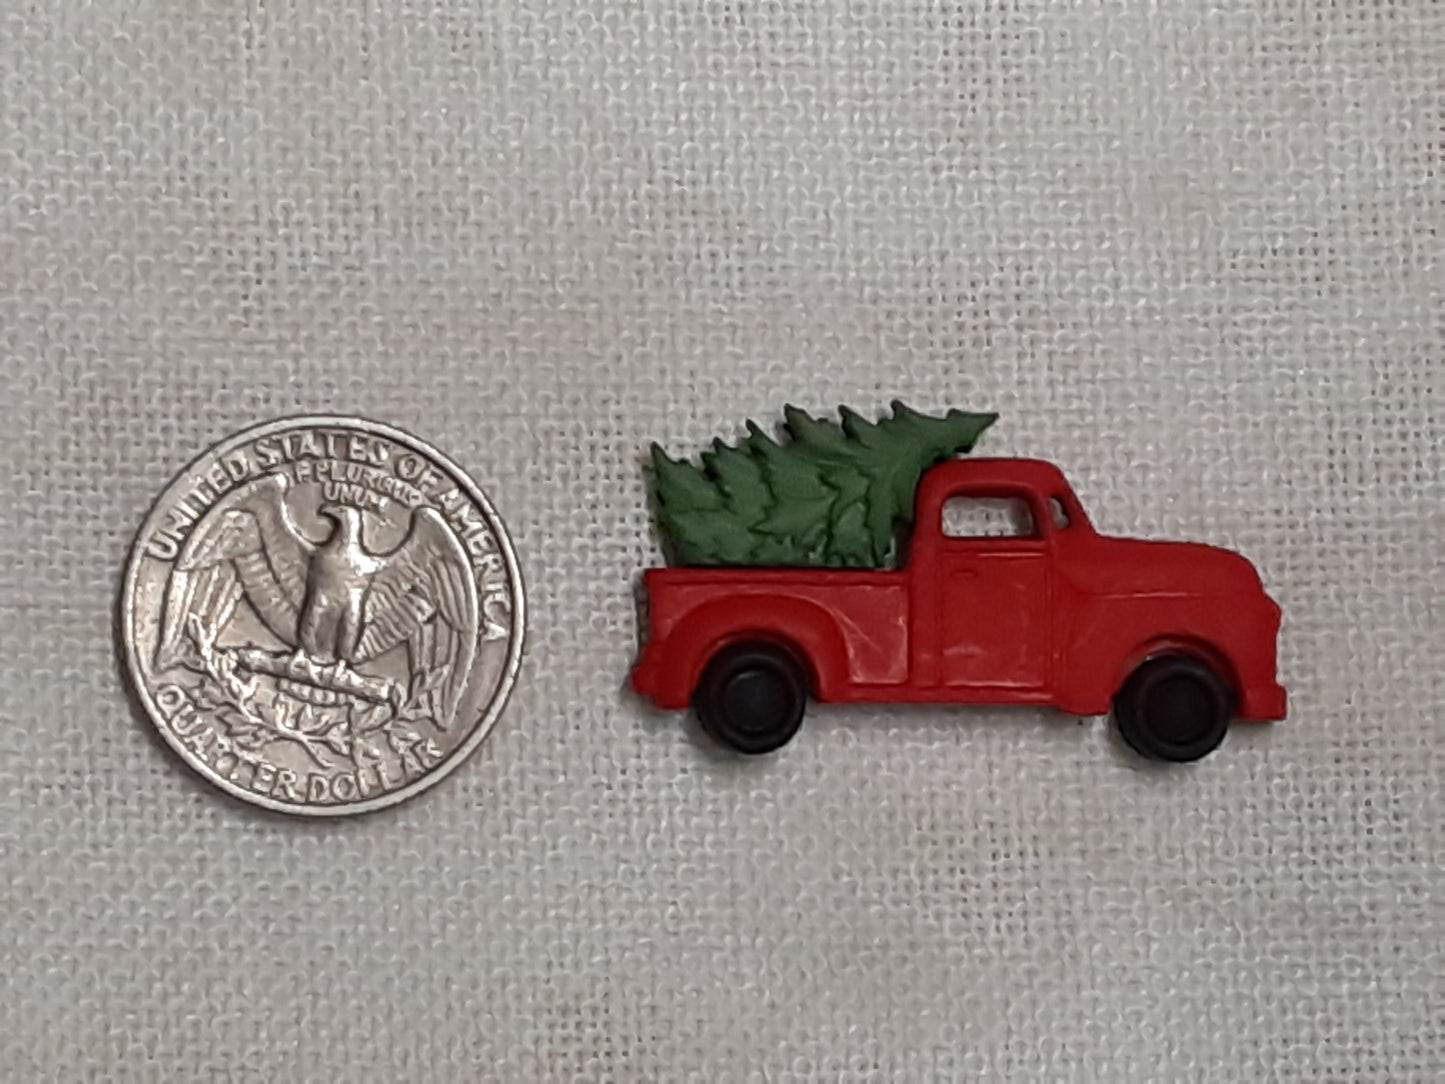 Red Truck needle minders